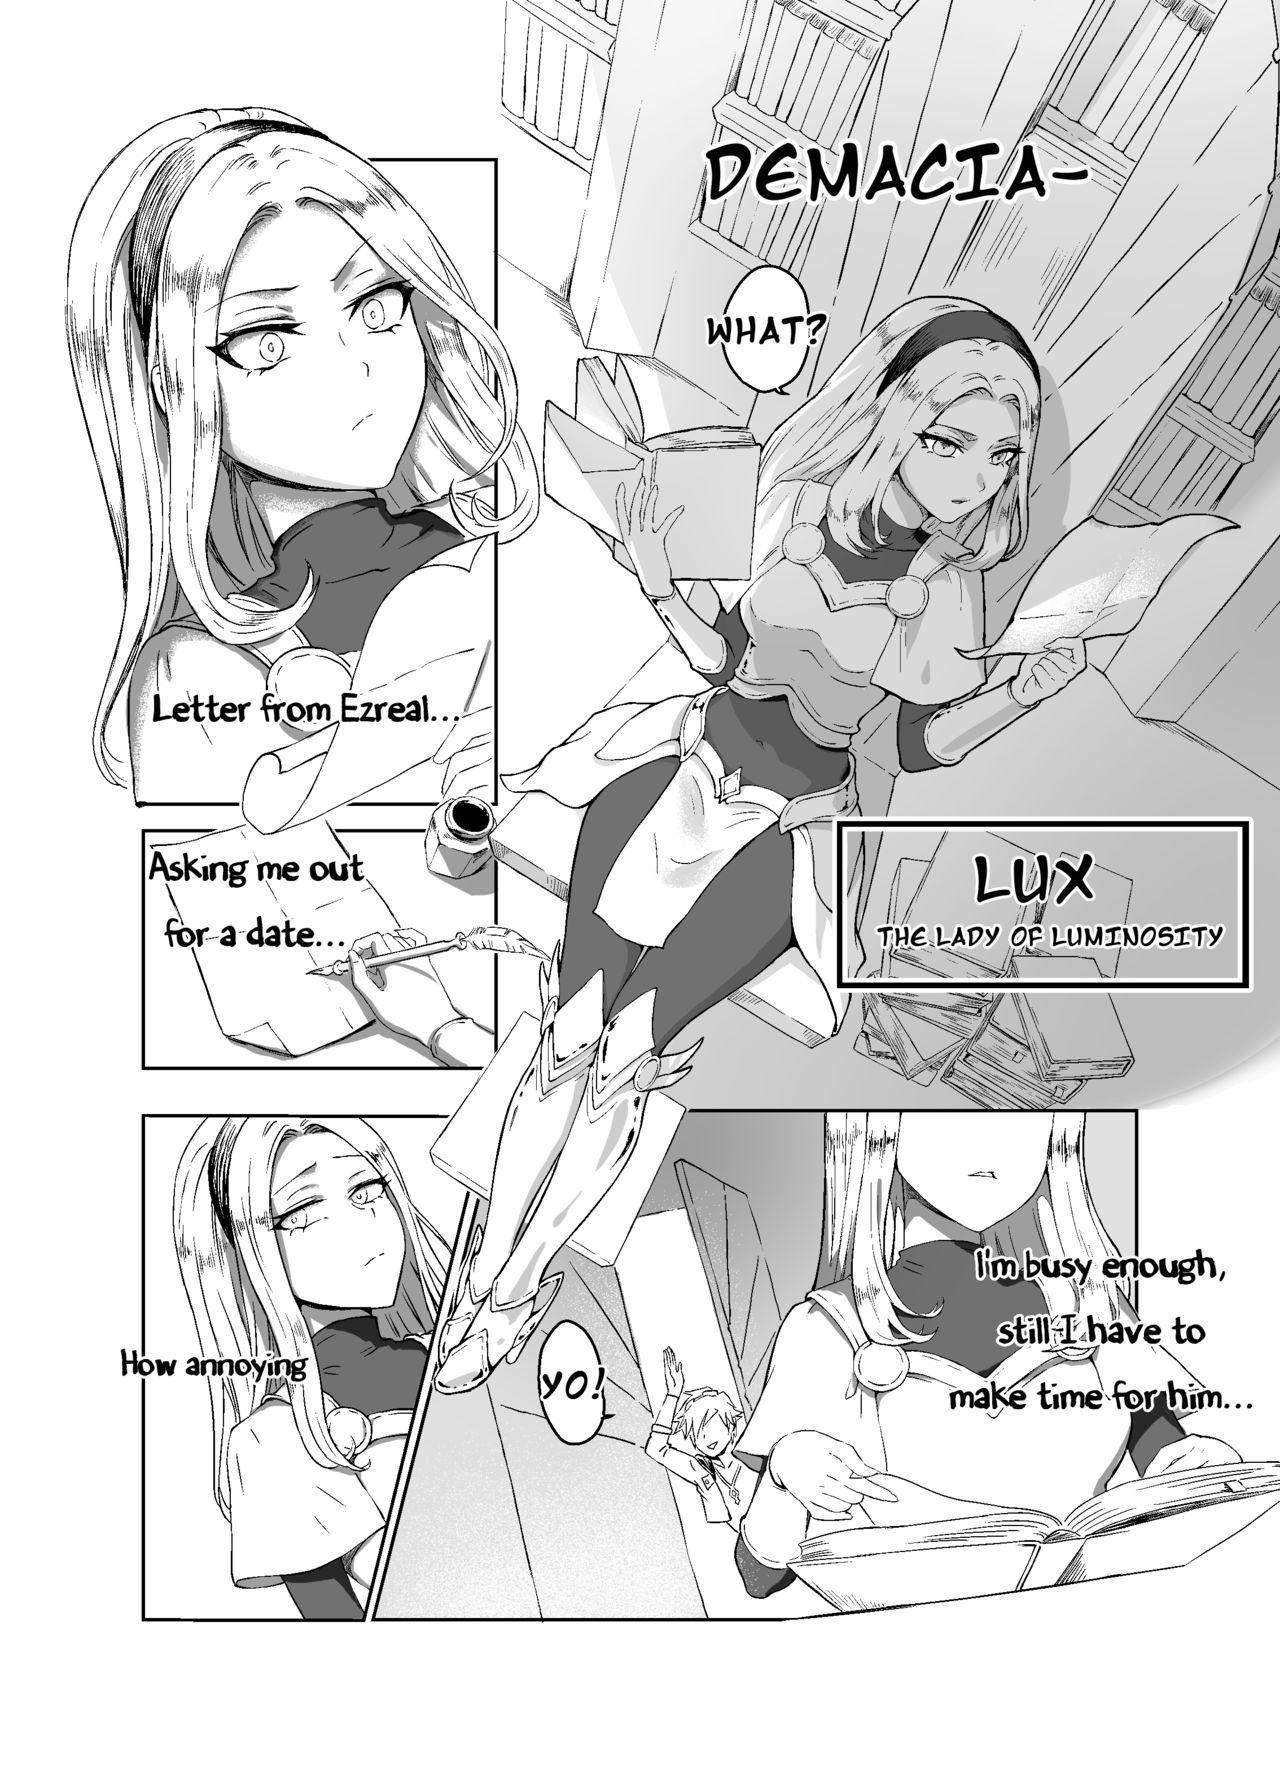 Bangladeshi Lux x Viego ft. Ezreal - League of legends Toy - Page 2